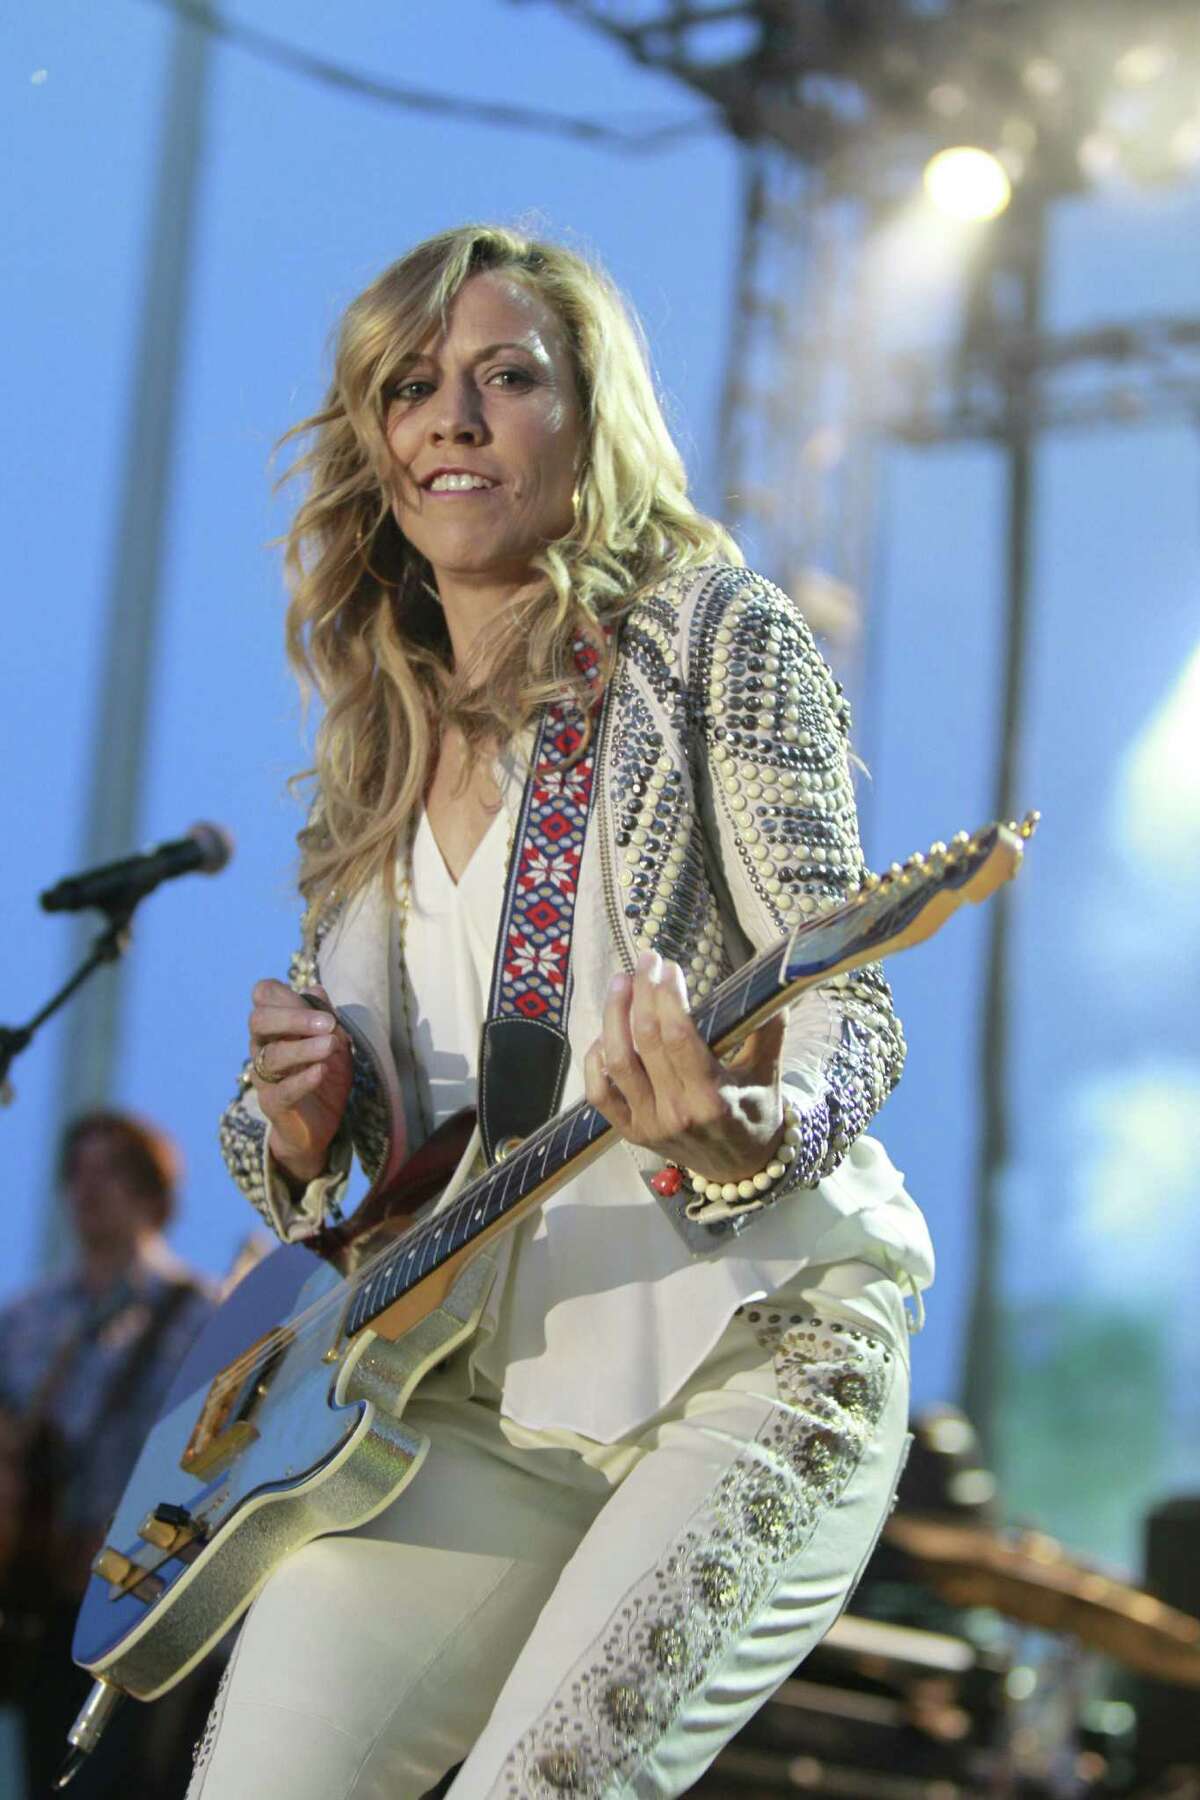 Sheryl Crow's new country album, “Feels Like Home,” was produced in Nashville, where she now lives.